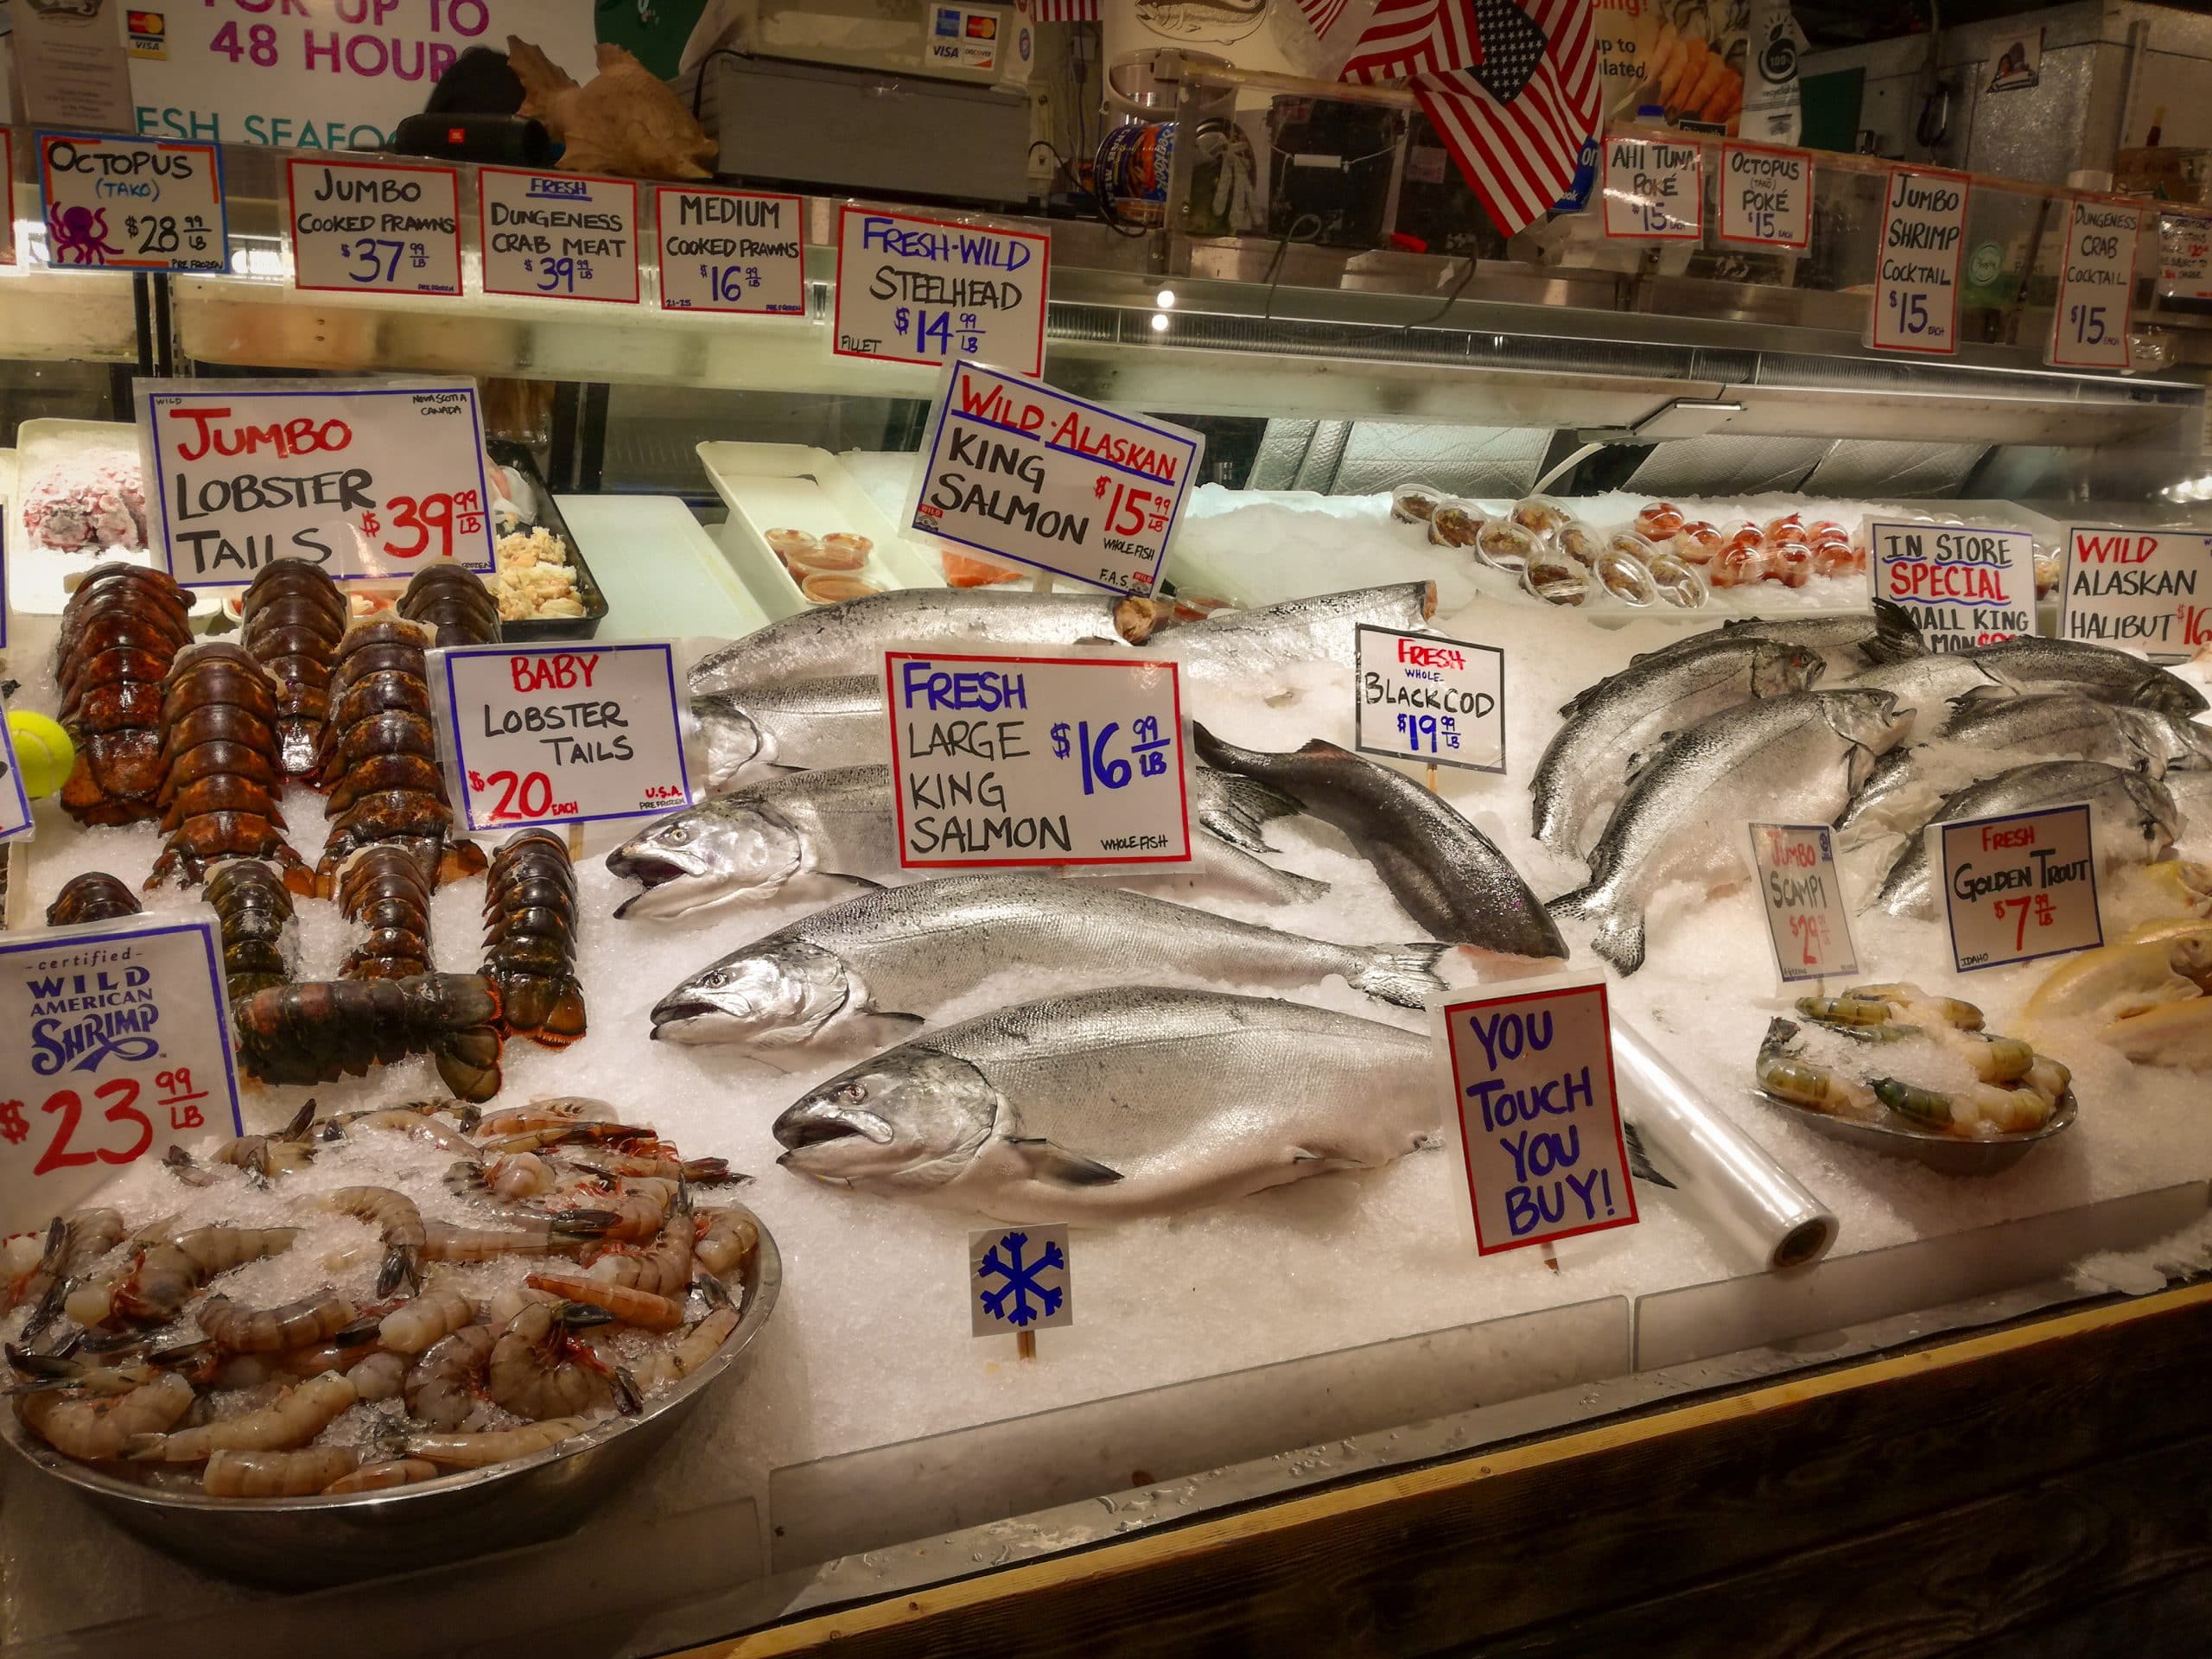 Seafood stall at Pike Place Market in Seattle